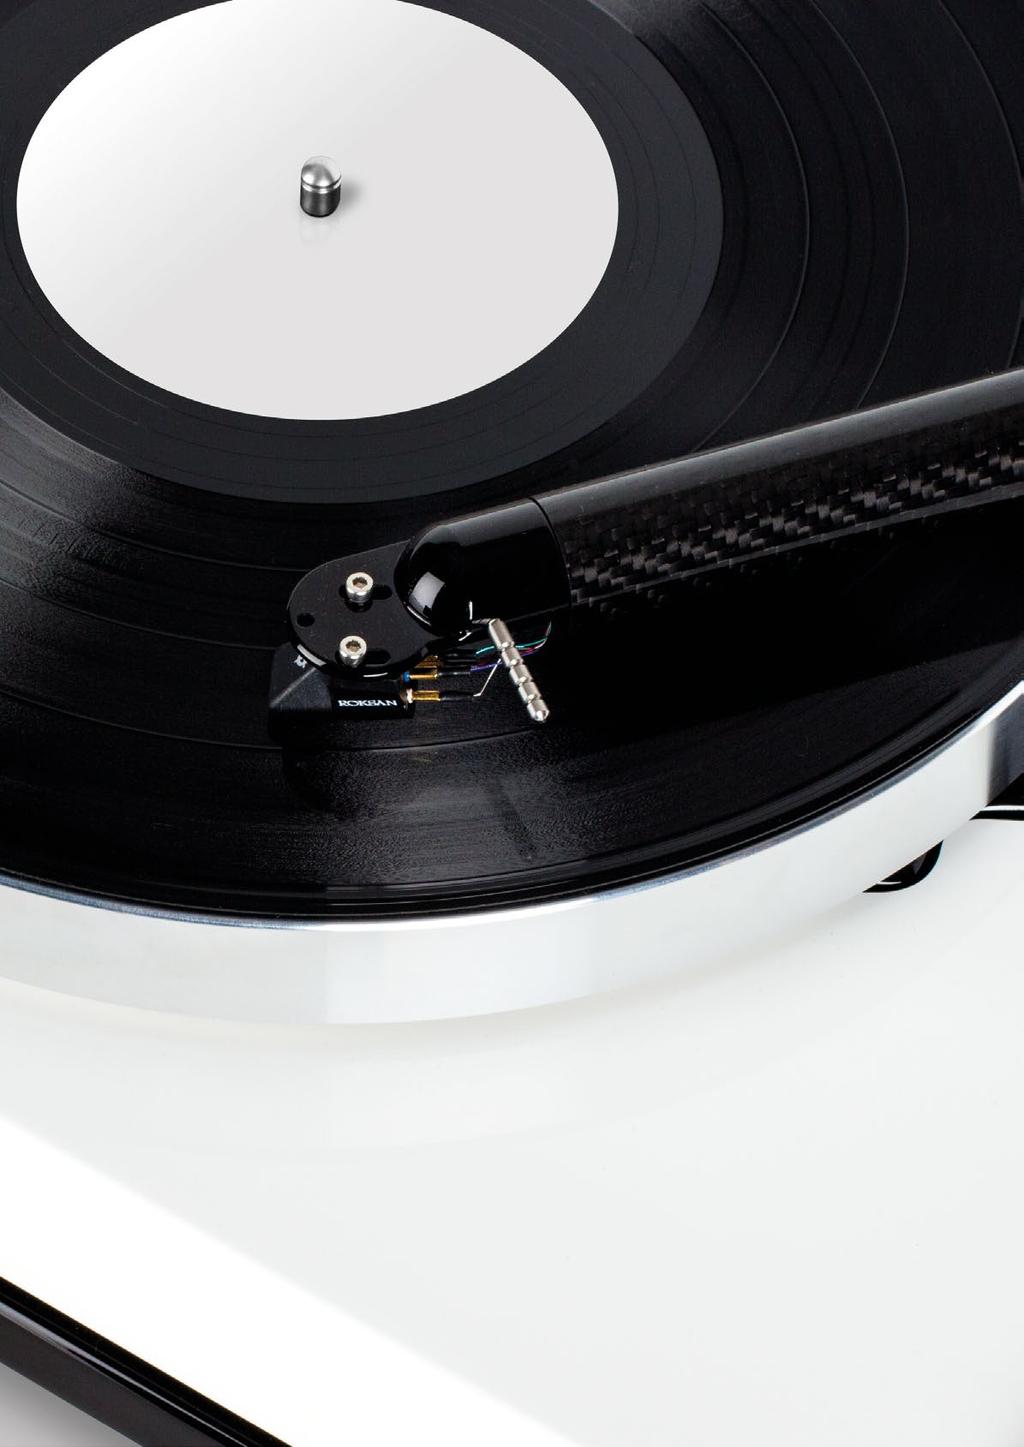 Turntables and Vinyl From the inception of the company, vinyl replay has always been at the heart of Roksan.